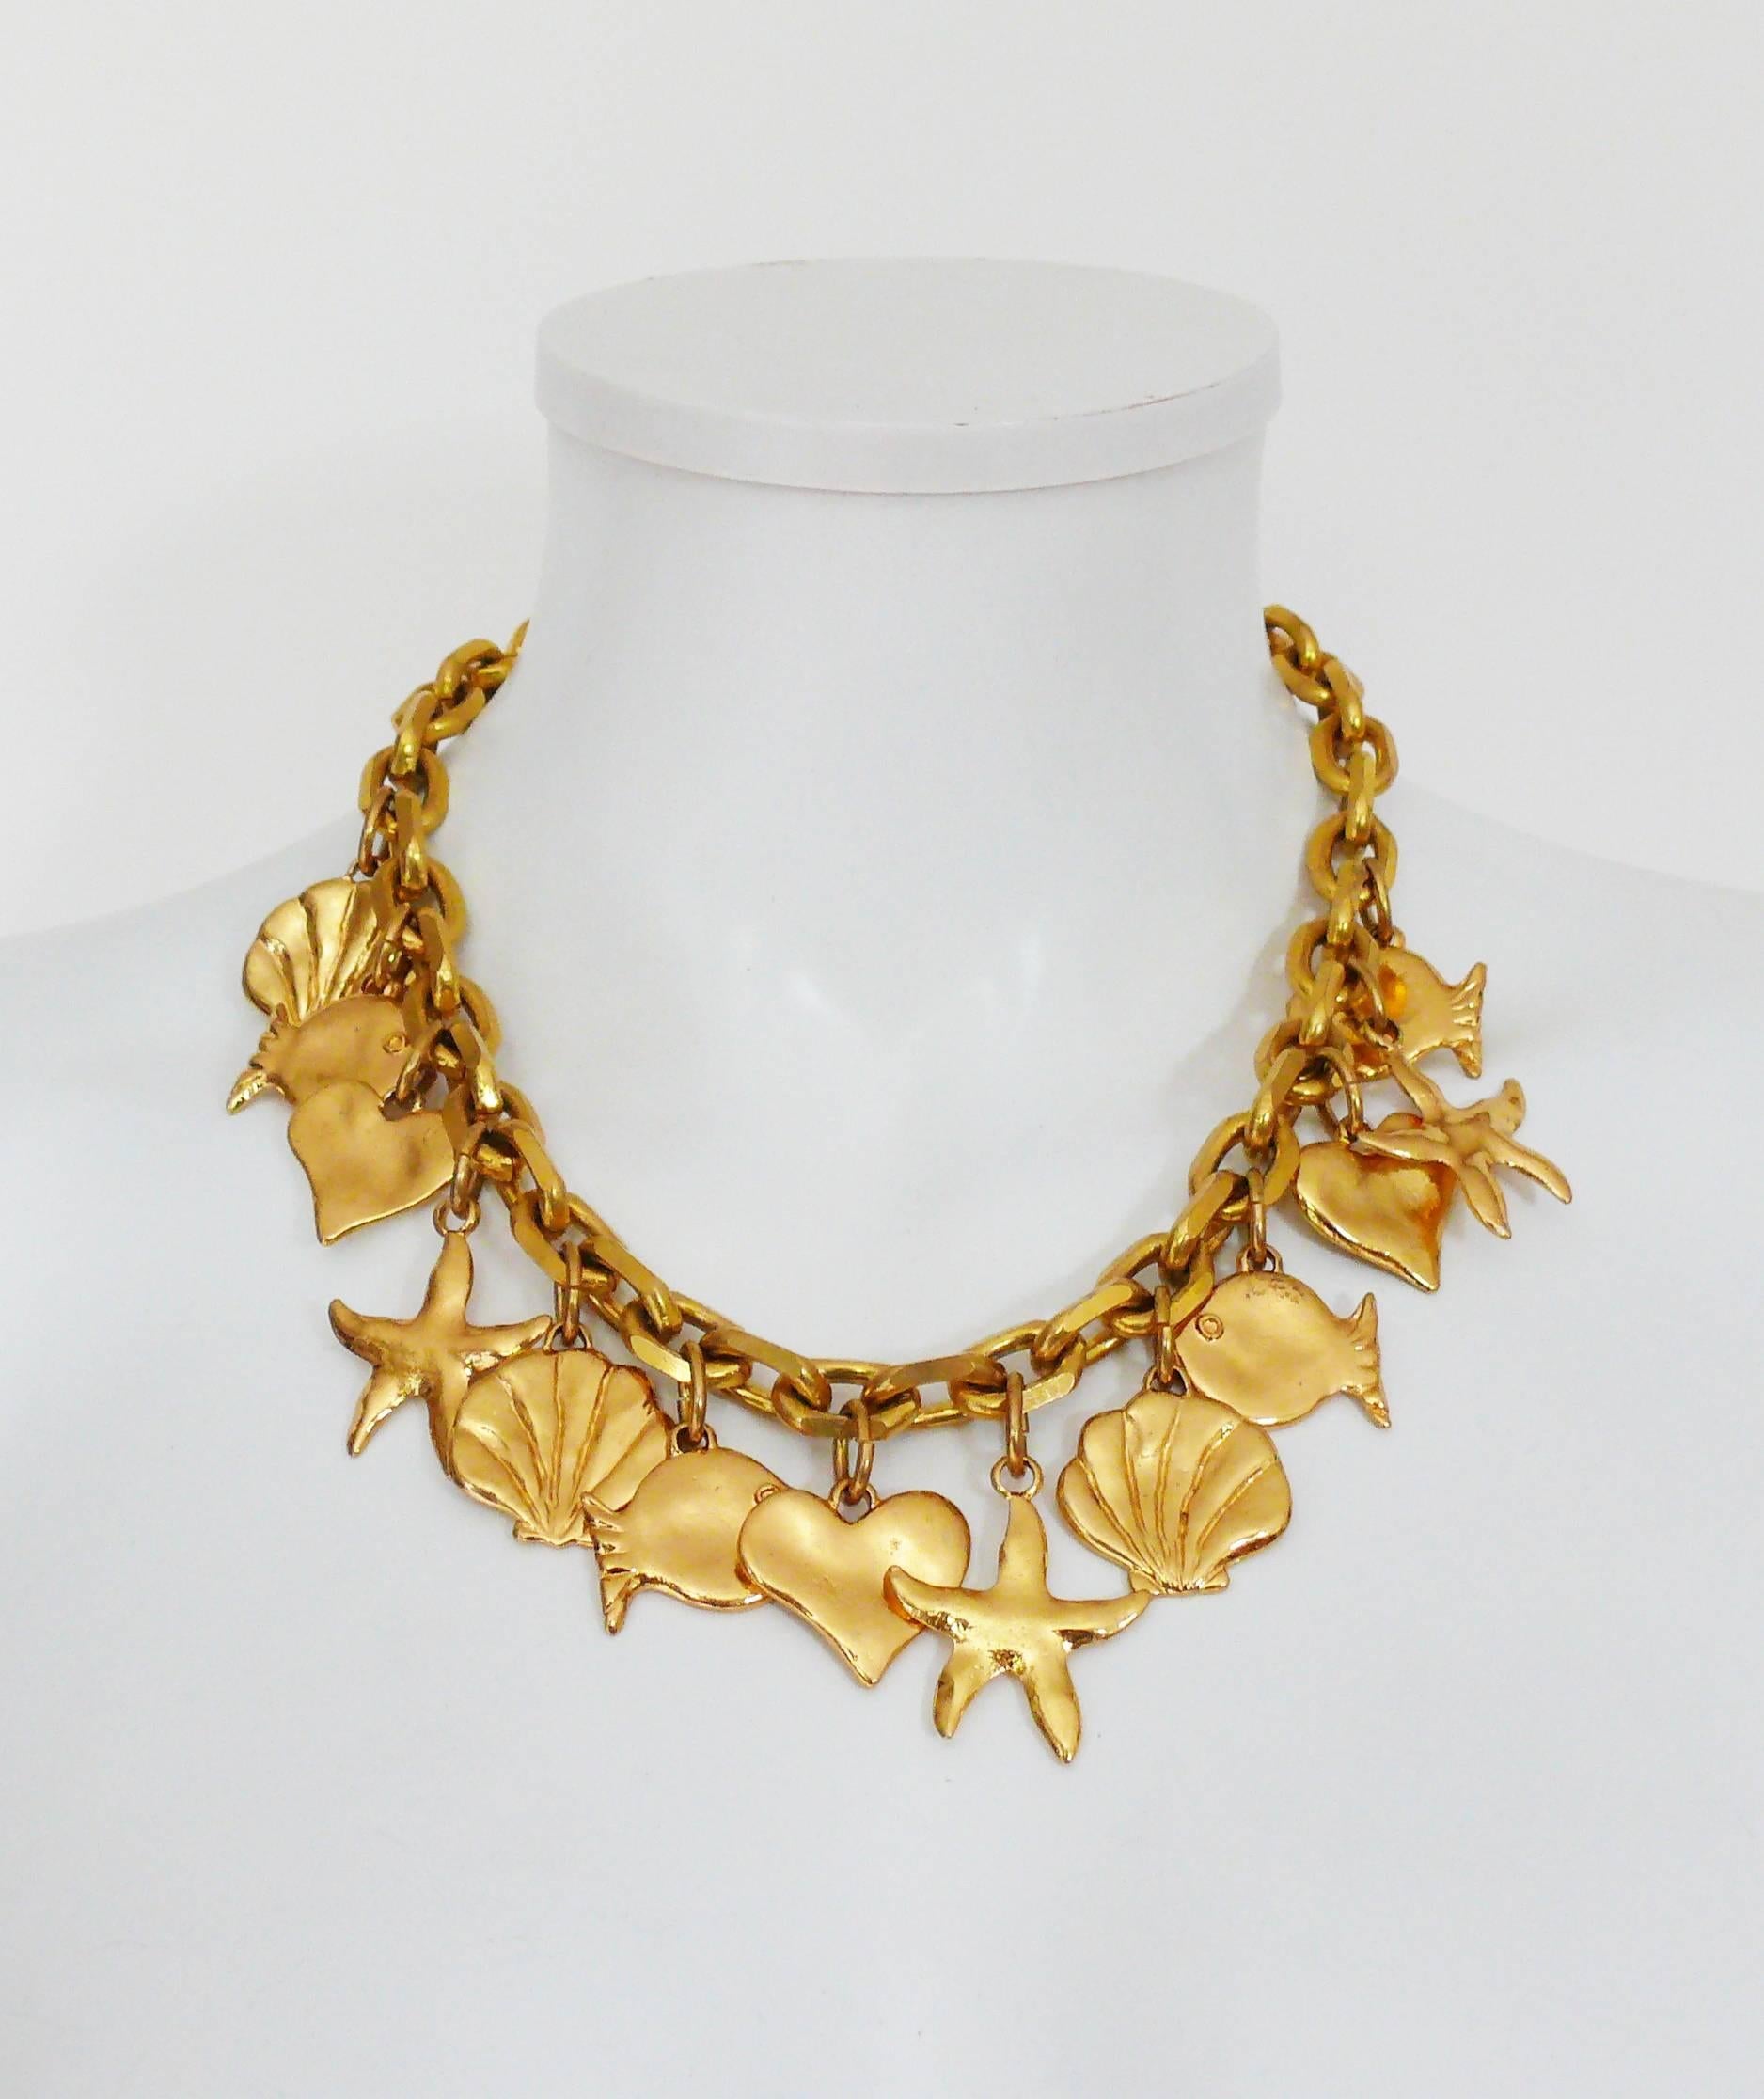 EDOUARD RAMBAUD vintage gold toned necklace featuring a chunky chain, sea life charms and hearts.

Marked EDOUARD RAMBAUD Paris.

T-bar toggle closure.

Indicative measurements :  length approx. 48 cm (18.90 inches).

JEWELRY CONDITION CHART
- New